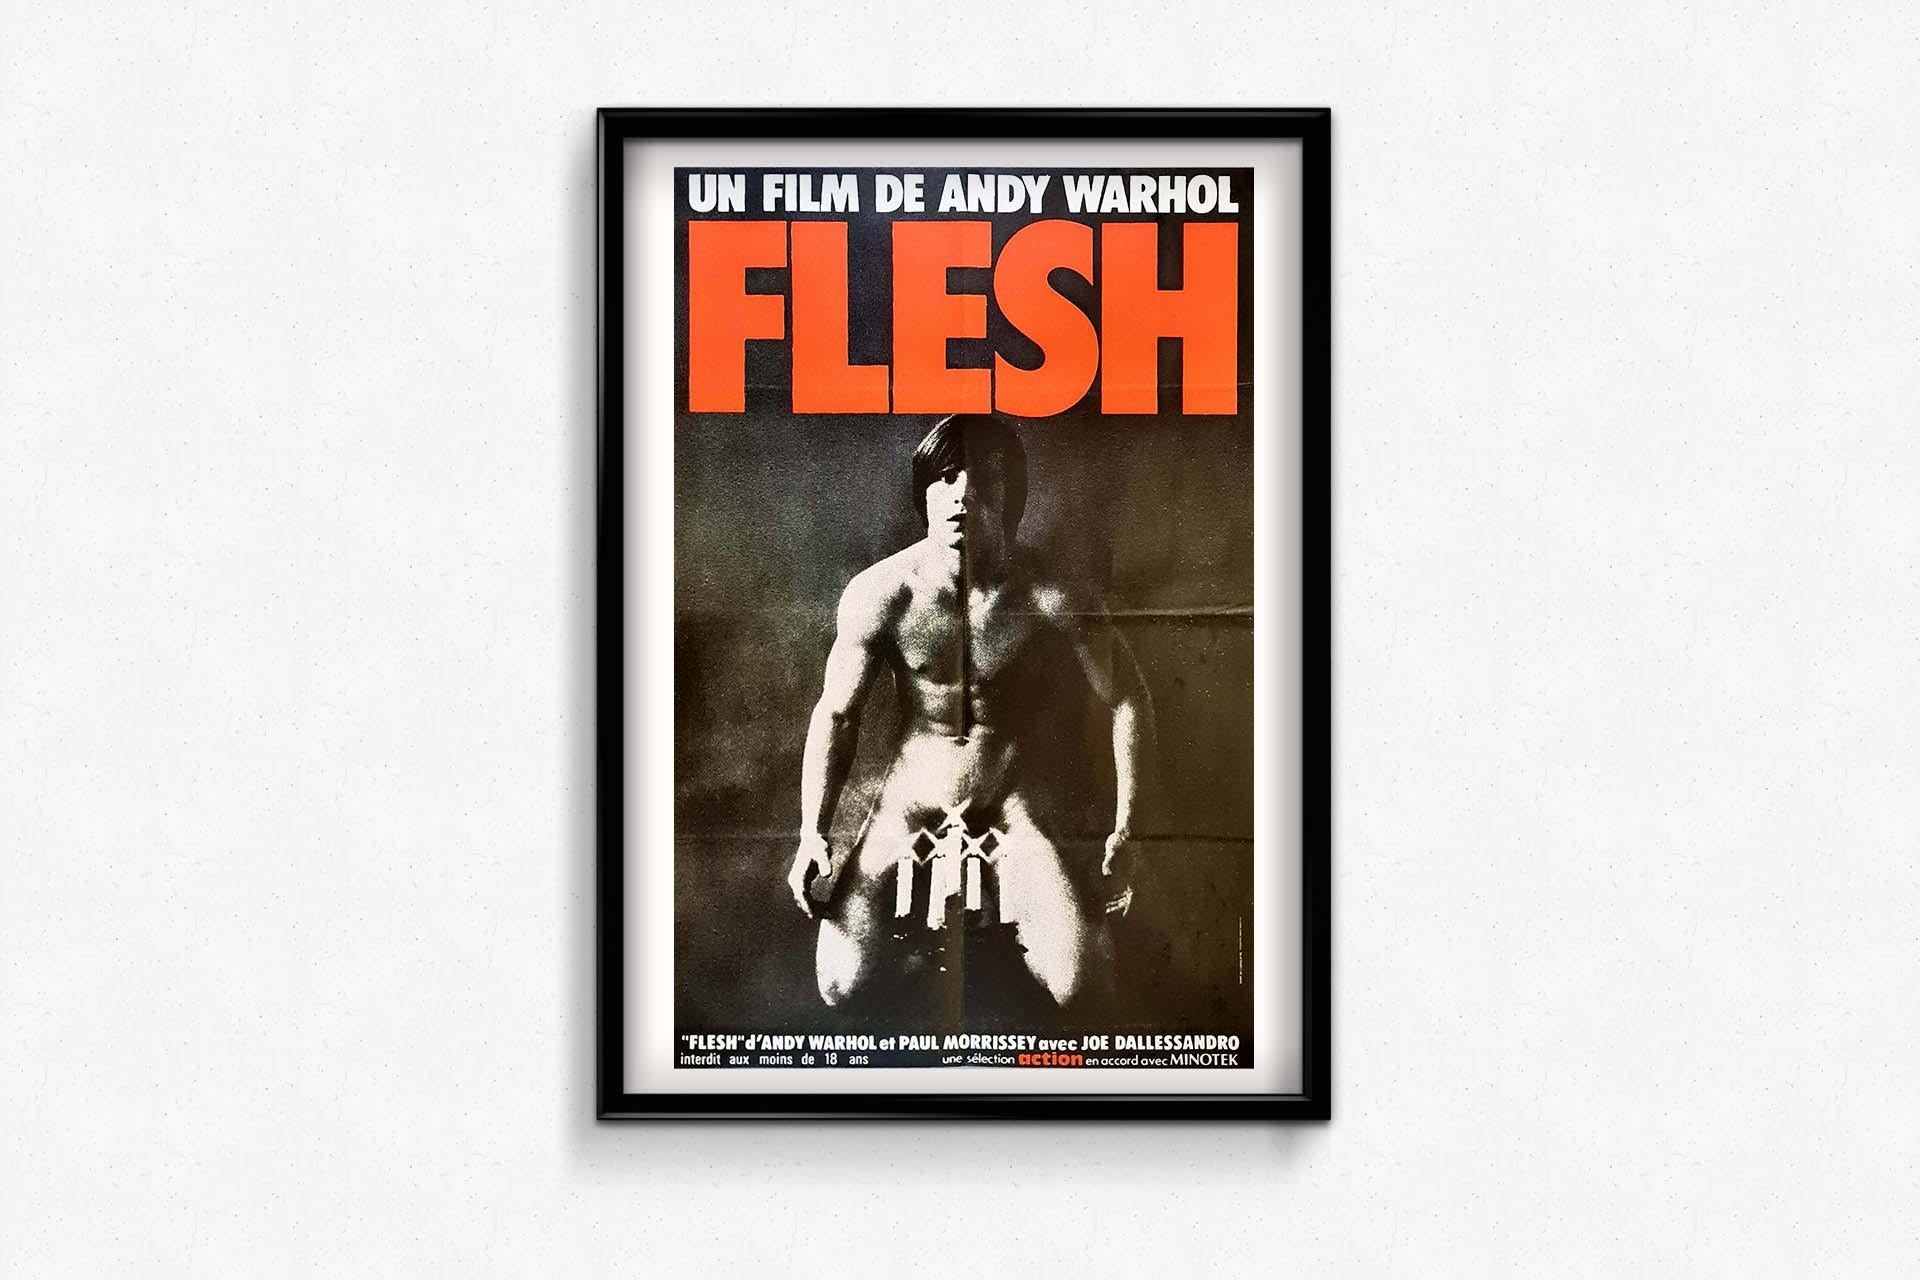 Movie Poster

Flesh is a 1968 American film directed by Paul Morrissey.

It features Joe Dallesandro as a hustler working the streets of New York.
It features several Warhol superstars, and marks the film debut of Jackie Curtis and Candy